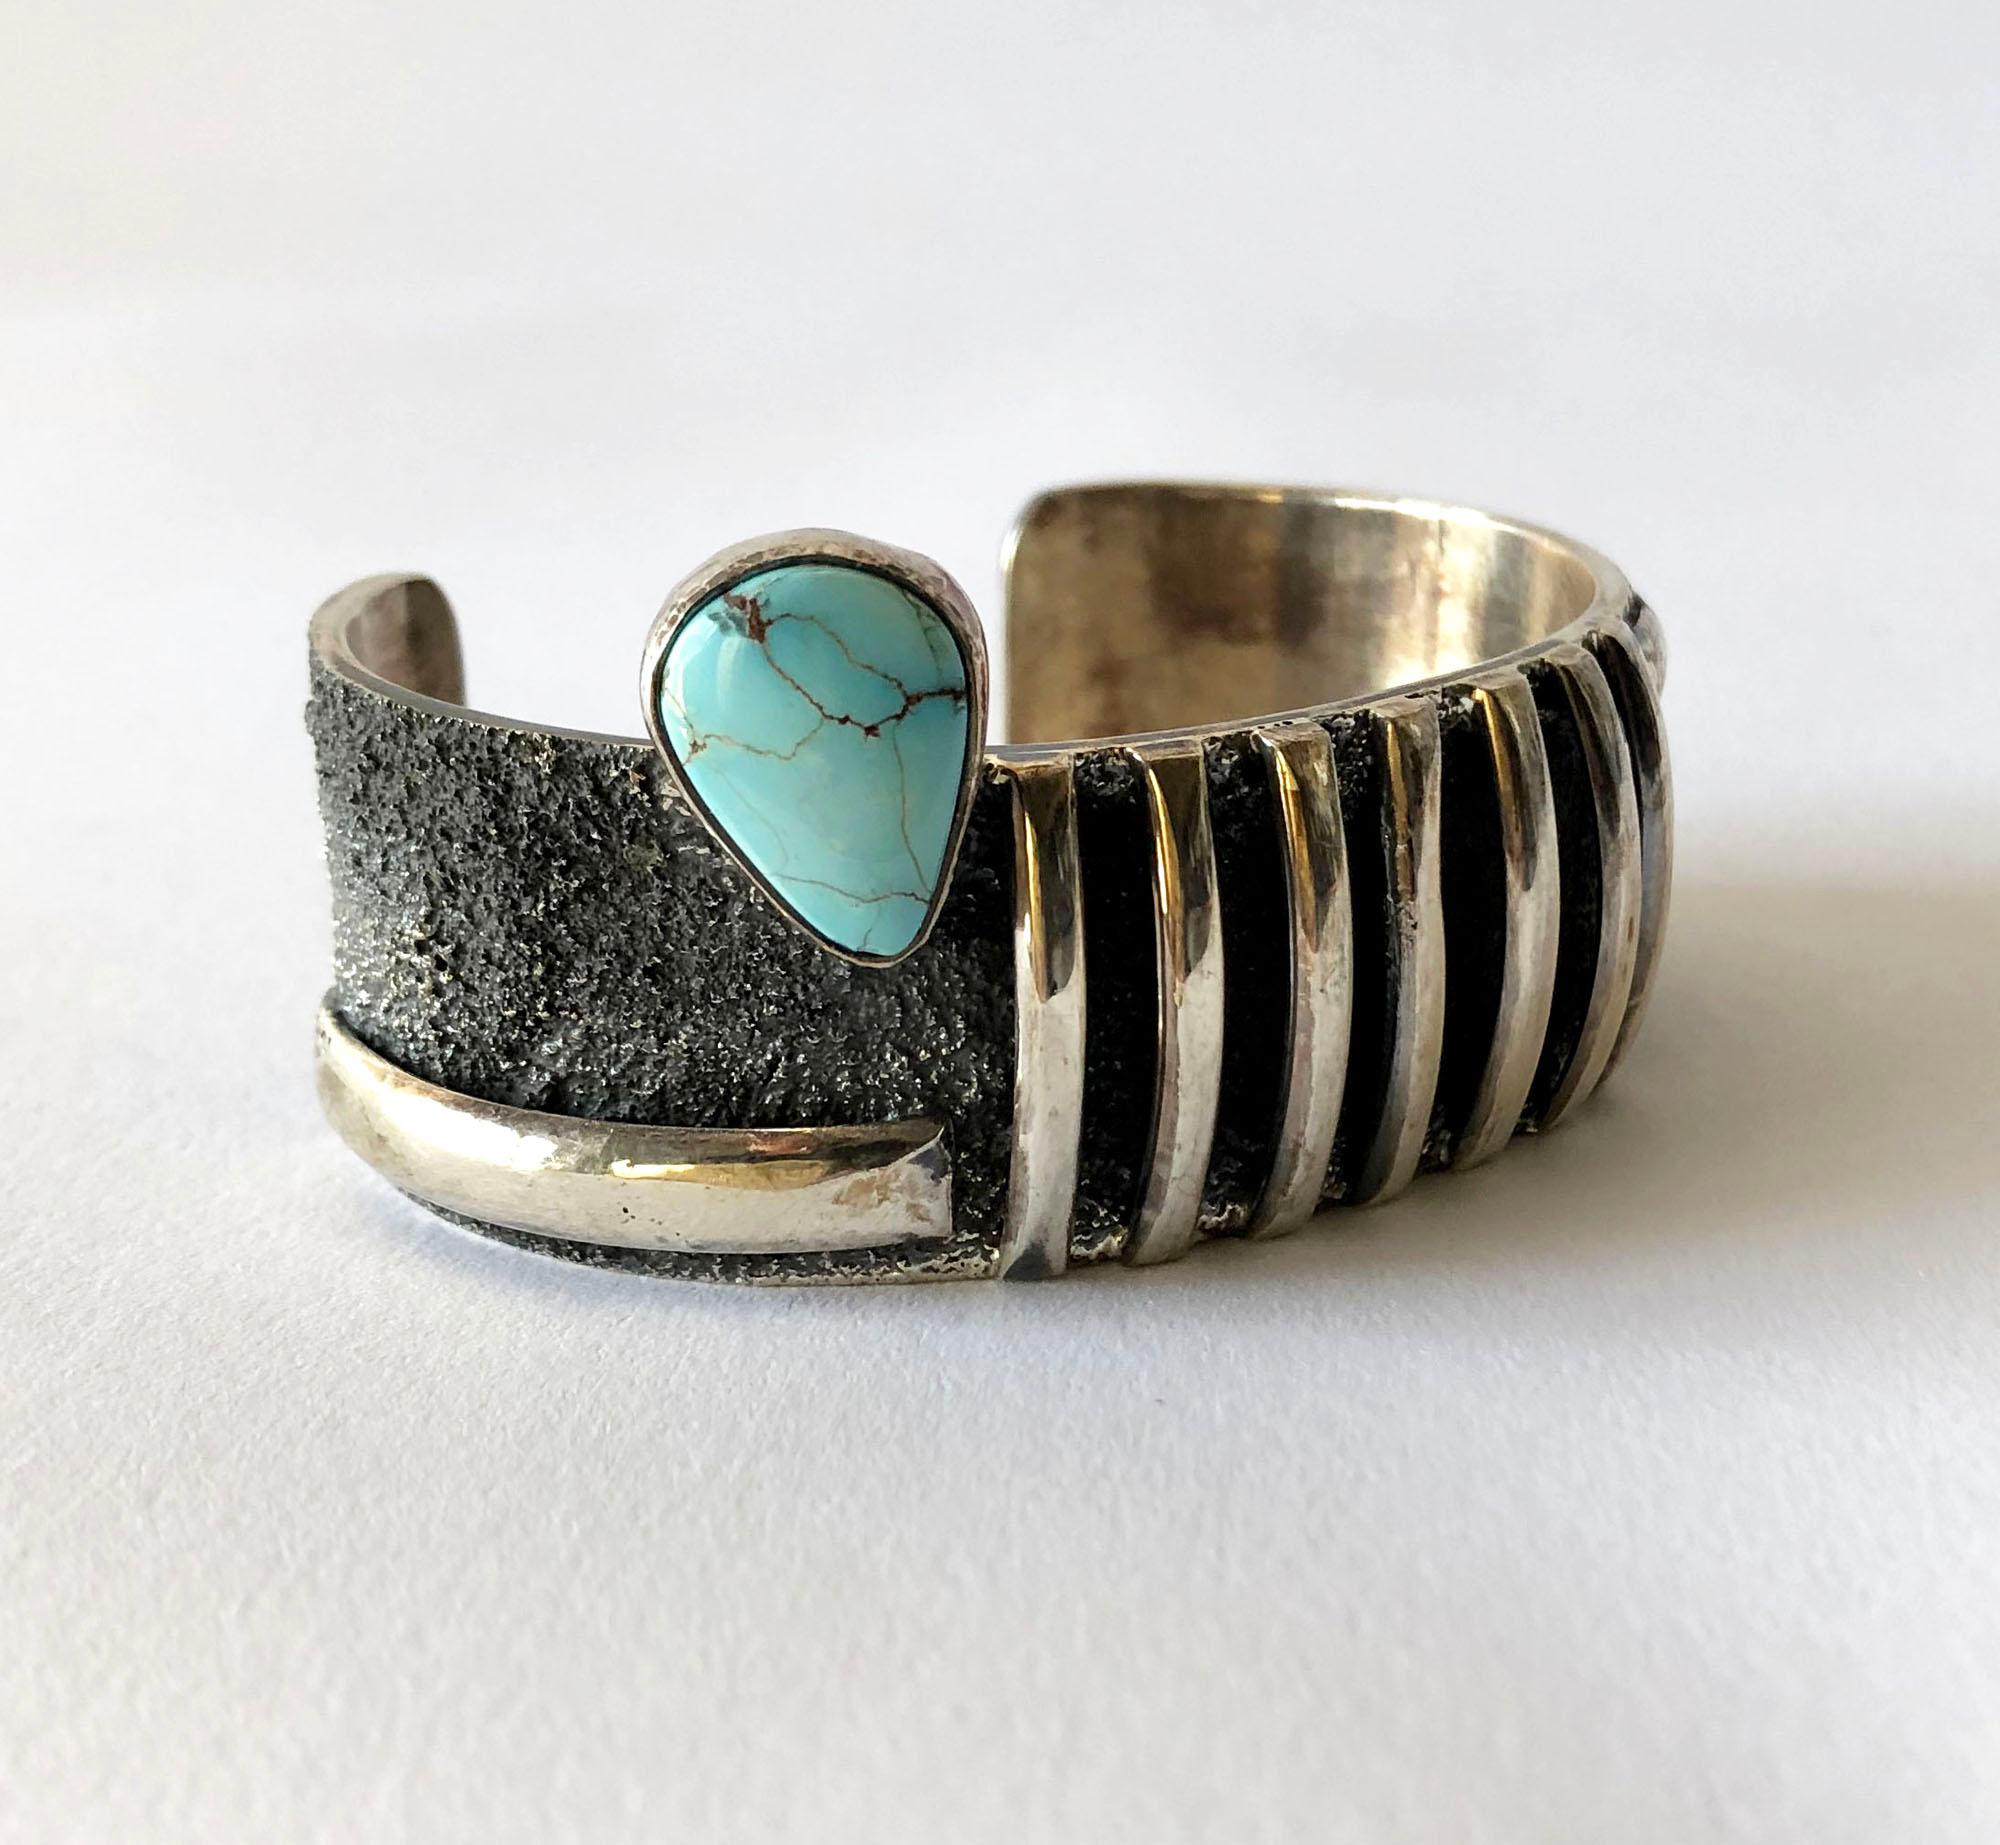 Native American sterling silver cuff bracelet with candelaria turquoise designed by Darrin Livingston. Bracelet measures 1